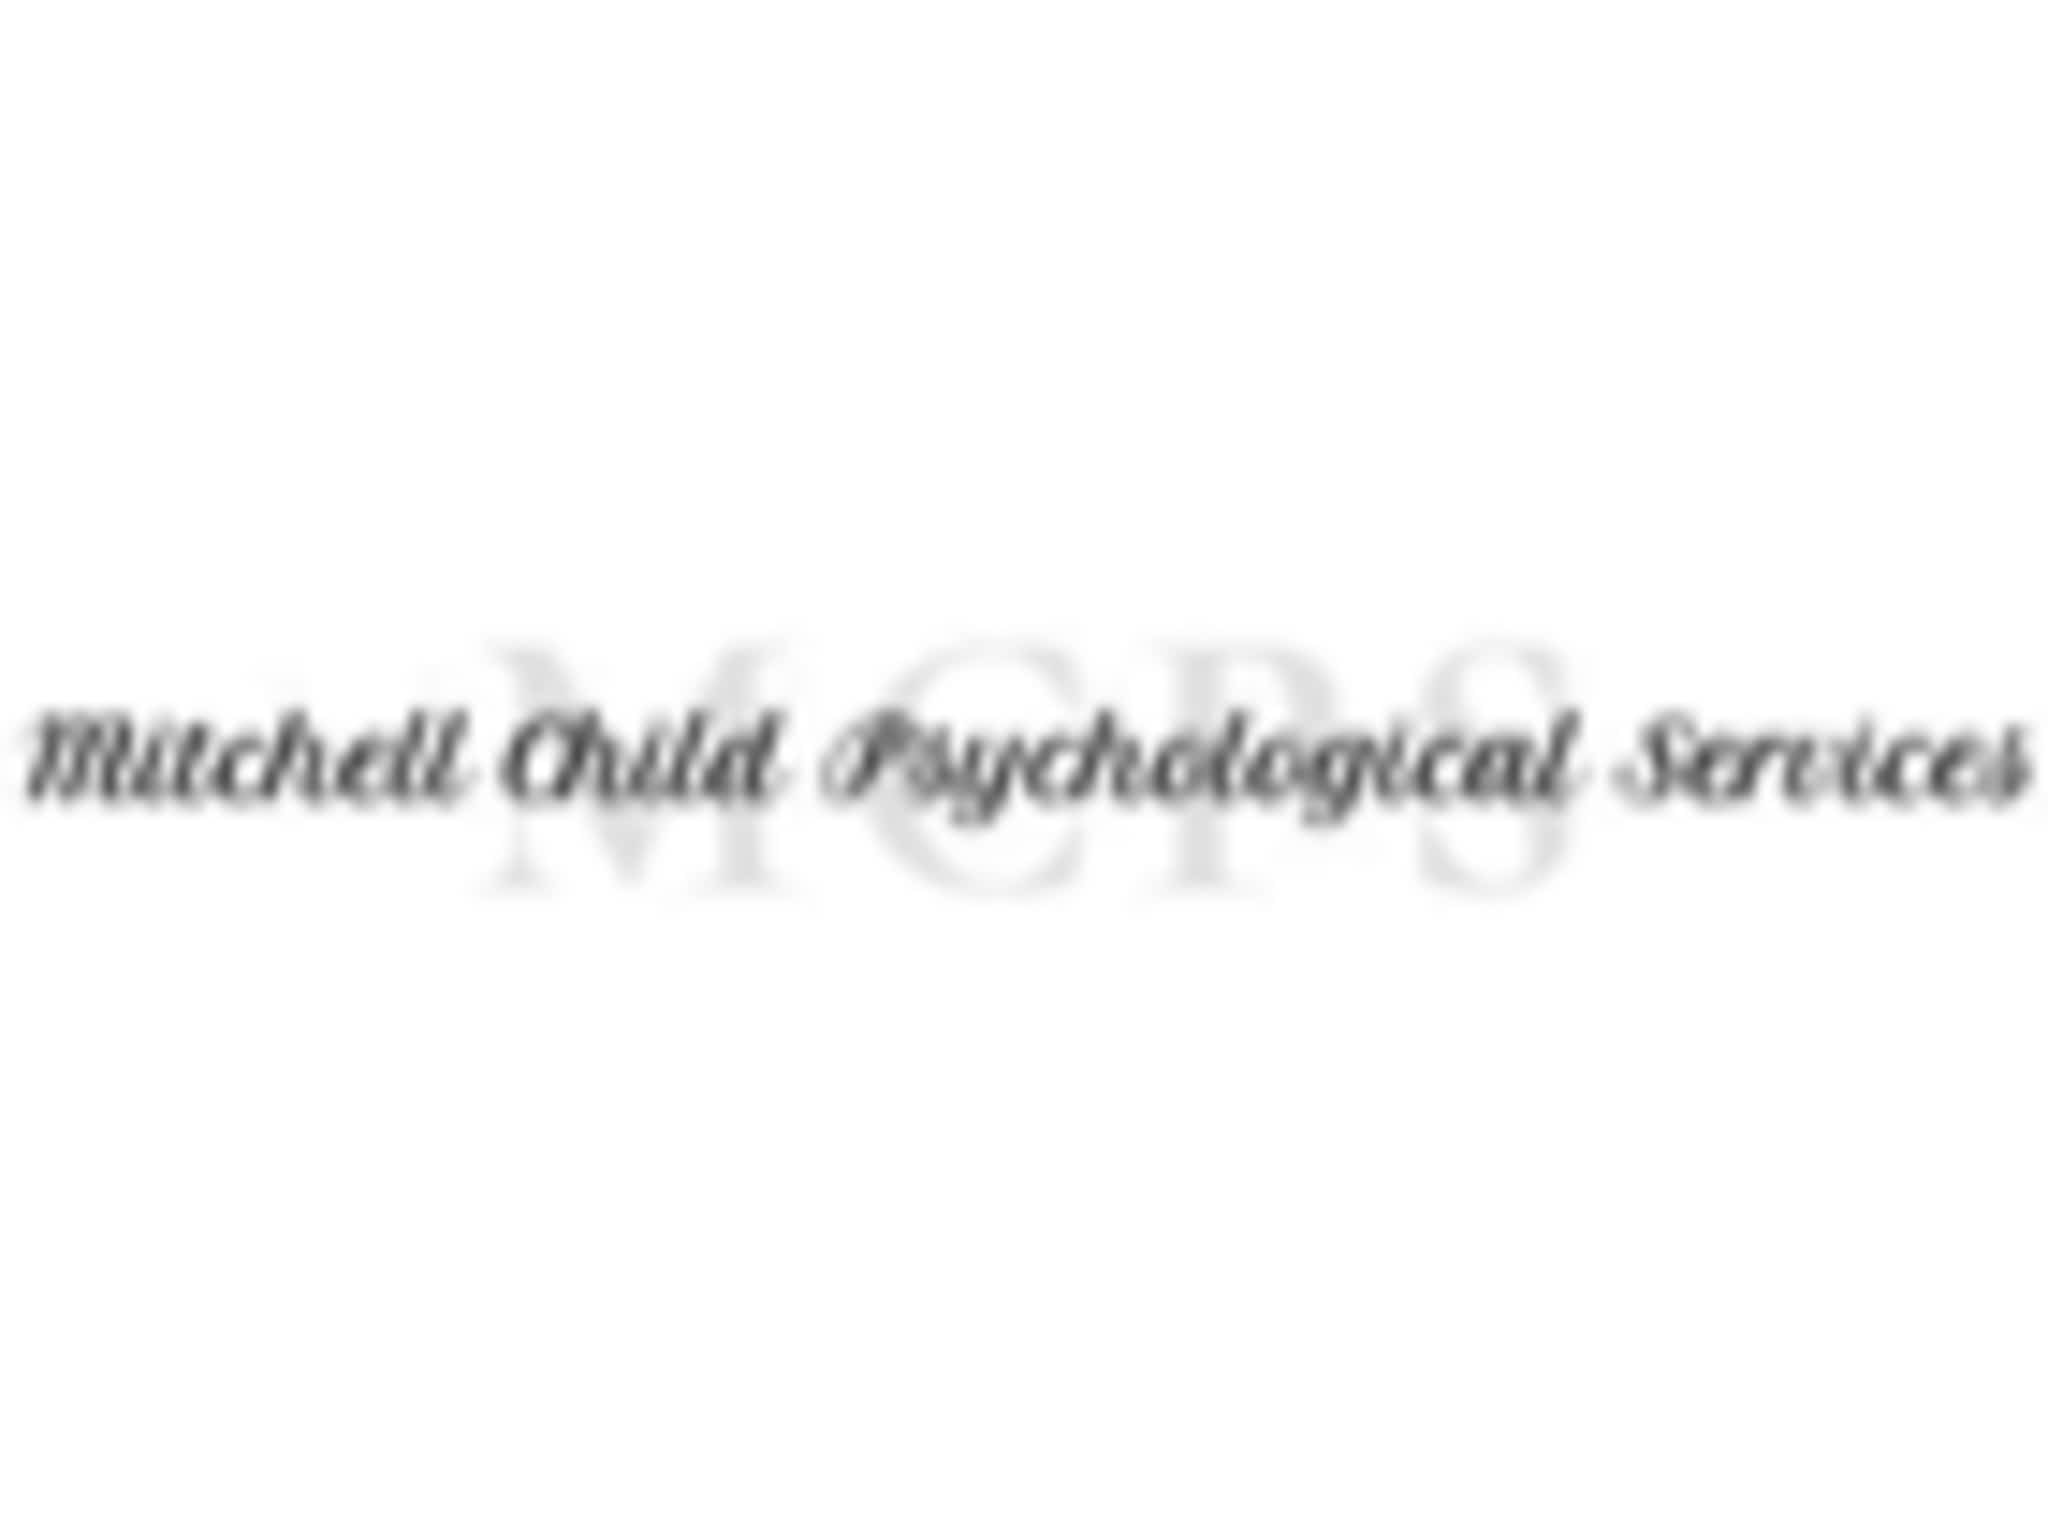 photo Mitchell Child Psychological Services